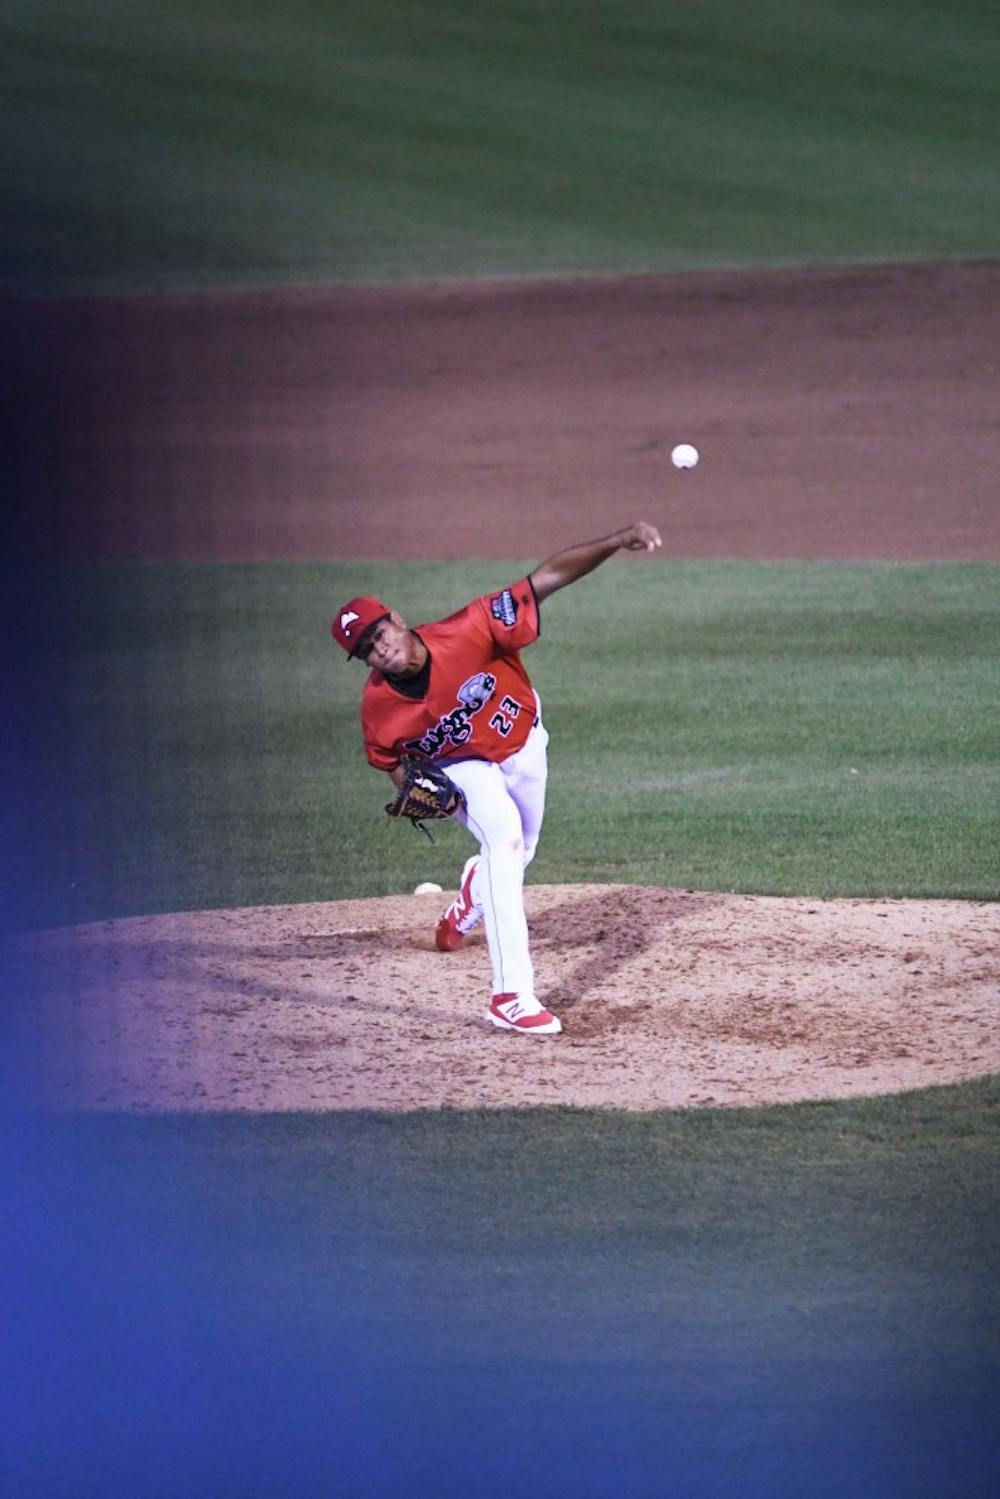 <p>Gabriel Moreno (23) pitches during the 13th annual Crosstown Showdown on Sept. 3, 2019 at Cooley Stadium in Lansing. The Lugnuts defeated the Spartans, 5-1. </p>